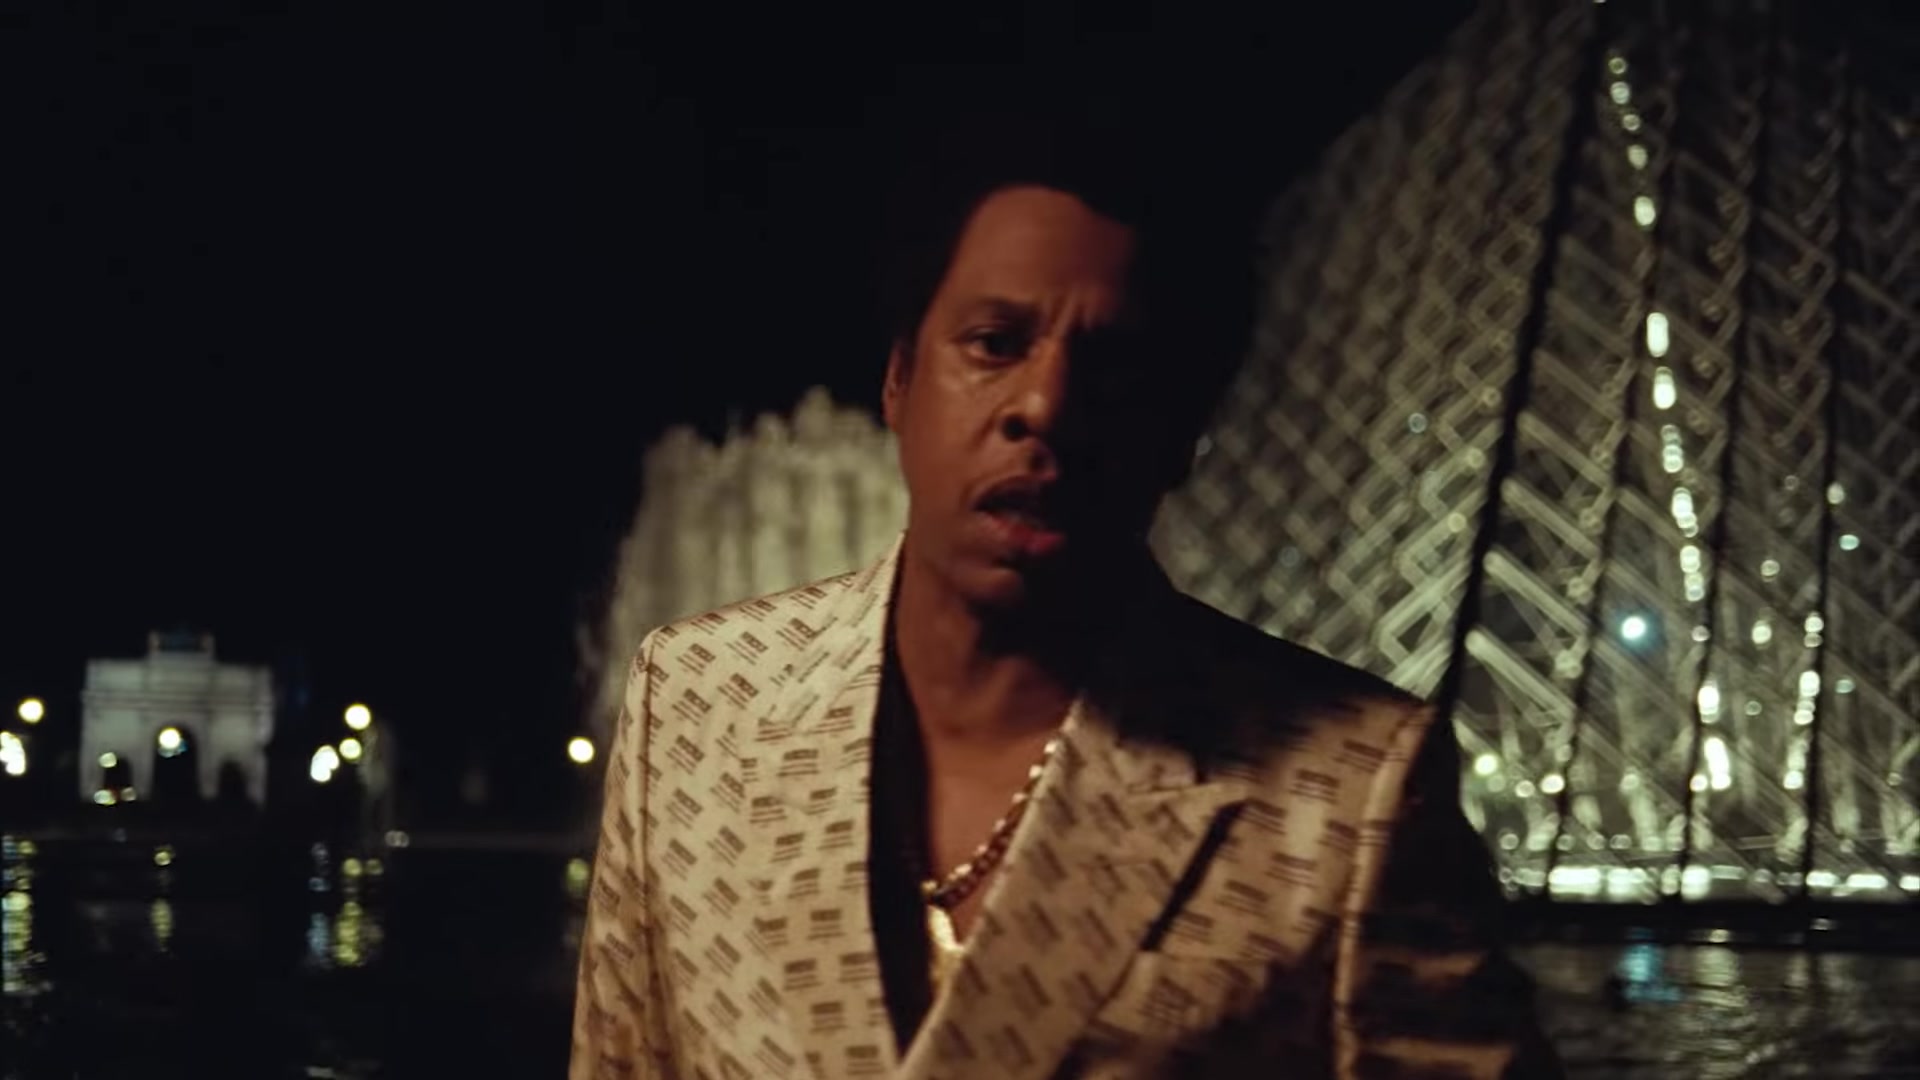 Gucci Jacket Worn by Jay-Z in “APESHIT” by The Carters (2018) Official Music Video1920 x 1080